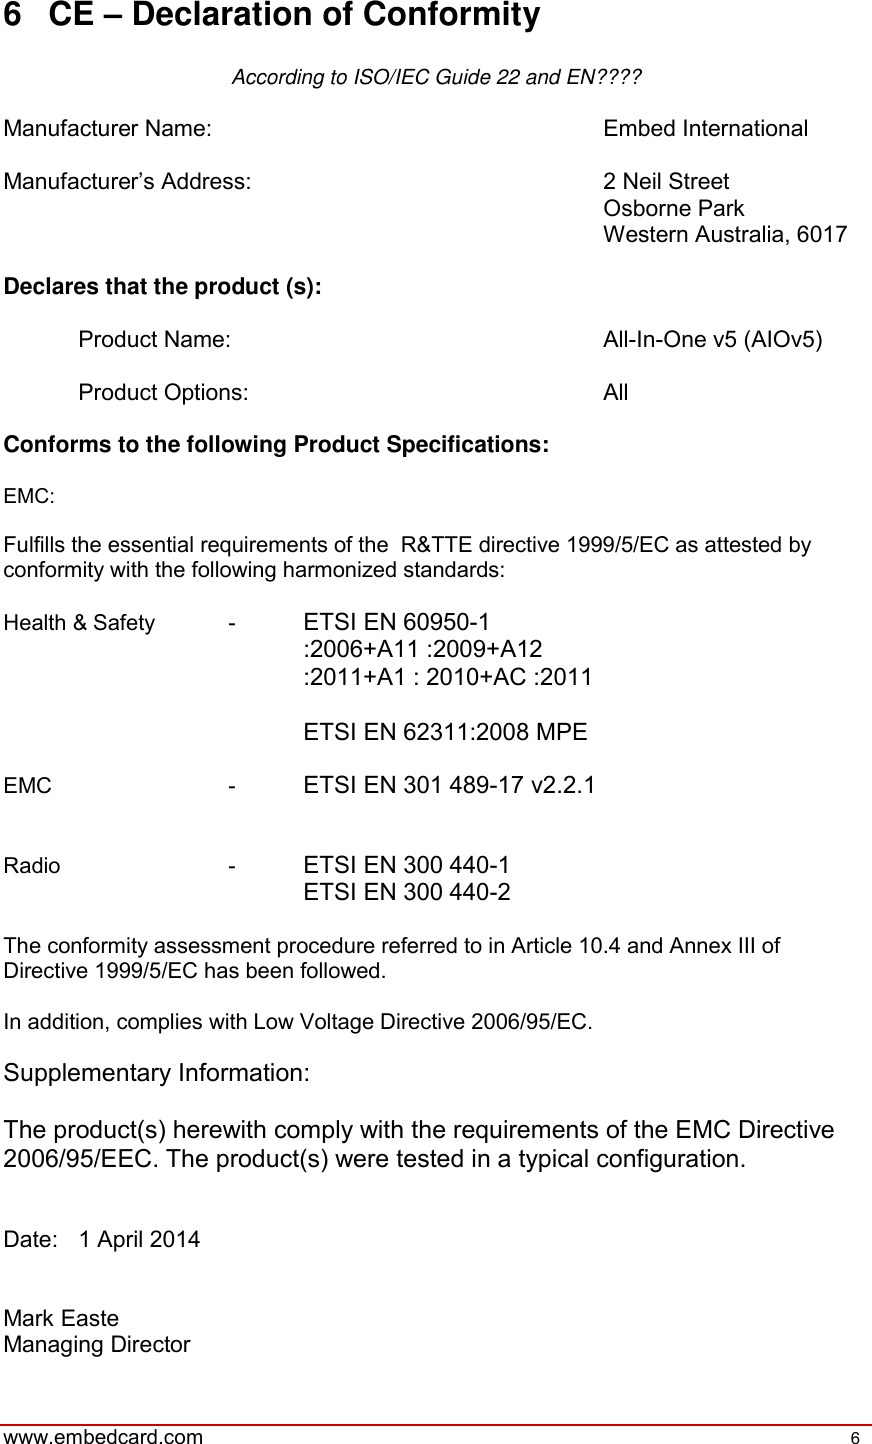   www.embedcard.com    6   6  CE – Declaration of Conformity  According to ISO/IEC Guide 22 and EN????  Manufacturer Name:            Embed International  Manufacturer’s Address:          2 Neil Street                 Osborne Park                 Western Australia, 6017  Declares that the product (s):    Product Name:          All-In-One v5 (AIOv5)    Product Options:          All  Conforms to the following Product Specifications:  EMC:  Fulfills the essential requirements of the  R&amp;TTE directive 1999/5/EC as attested by conformity with the following harmonized standards:  Health &amp; Safety  -  ETSI EN 60950-1 :2006+A11 :2009+A12 :2011+A1 : 2010+AC :2011  ETSI EN 62311:2008 MPE  EMC       -  ETSI EN 301 489-17 v2.2.1   Radio       -  ETSI EN 300 440-1 ETSI EN 300 440-2  The conformity assessment procedure referred to in Article 10.4 and Annex III of Directive 1999/5/EC has been followed.   In addition, complies with Low Voltage Directive 2006/95/EC.  Supplementary Information:  The product(s) herewith comply with the requirements of the EMC Directive 2006/95/EEC. The product(s) were tested in a typical configuration.   Date:  1 April 2014   Mark Easte Managing Director 